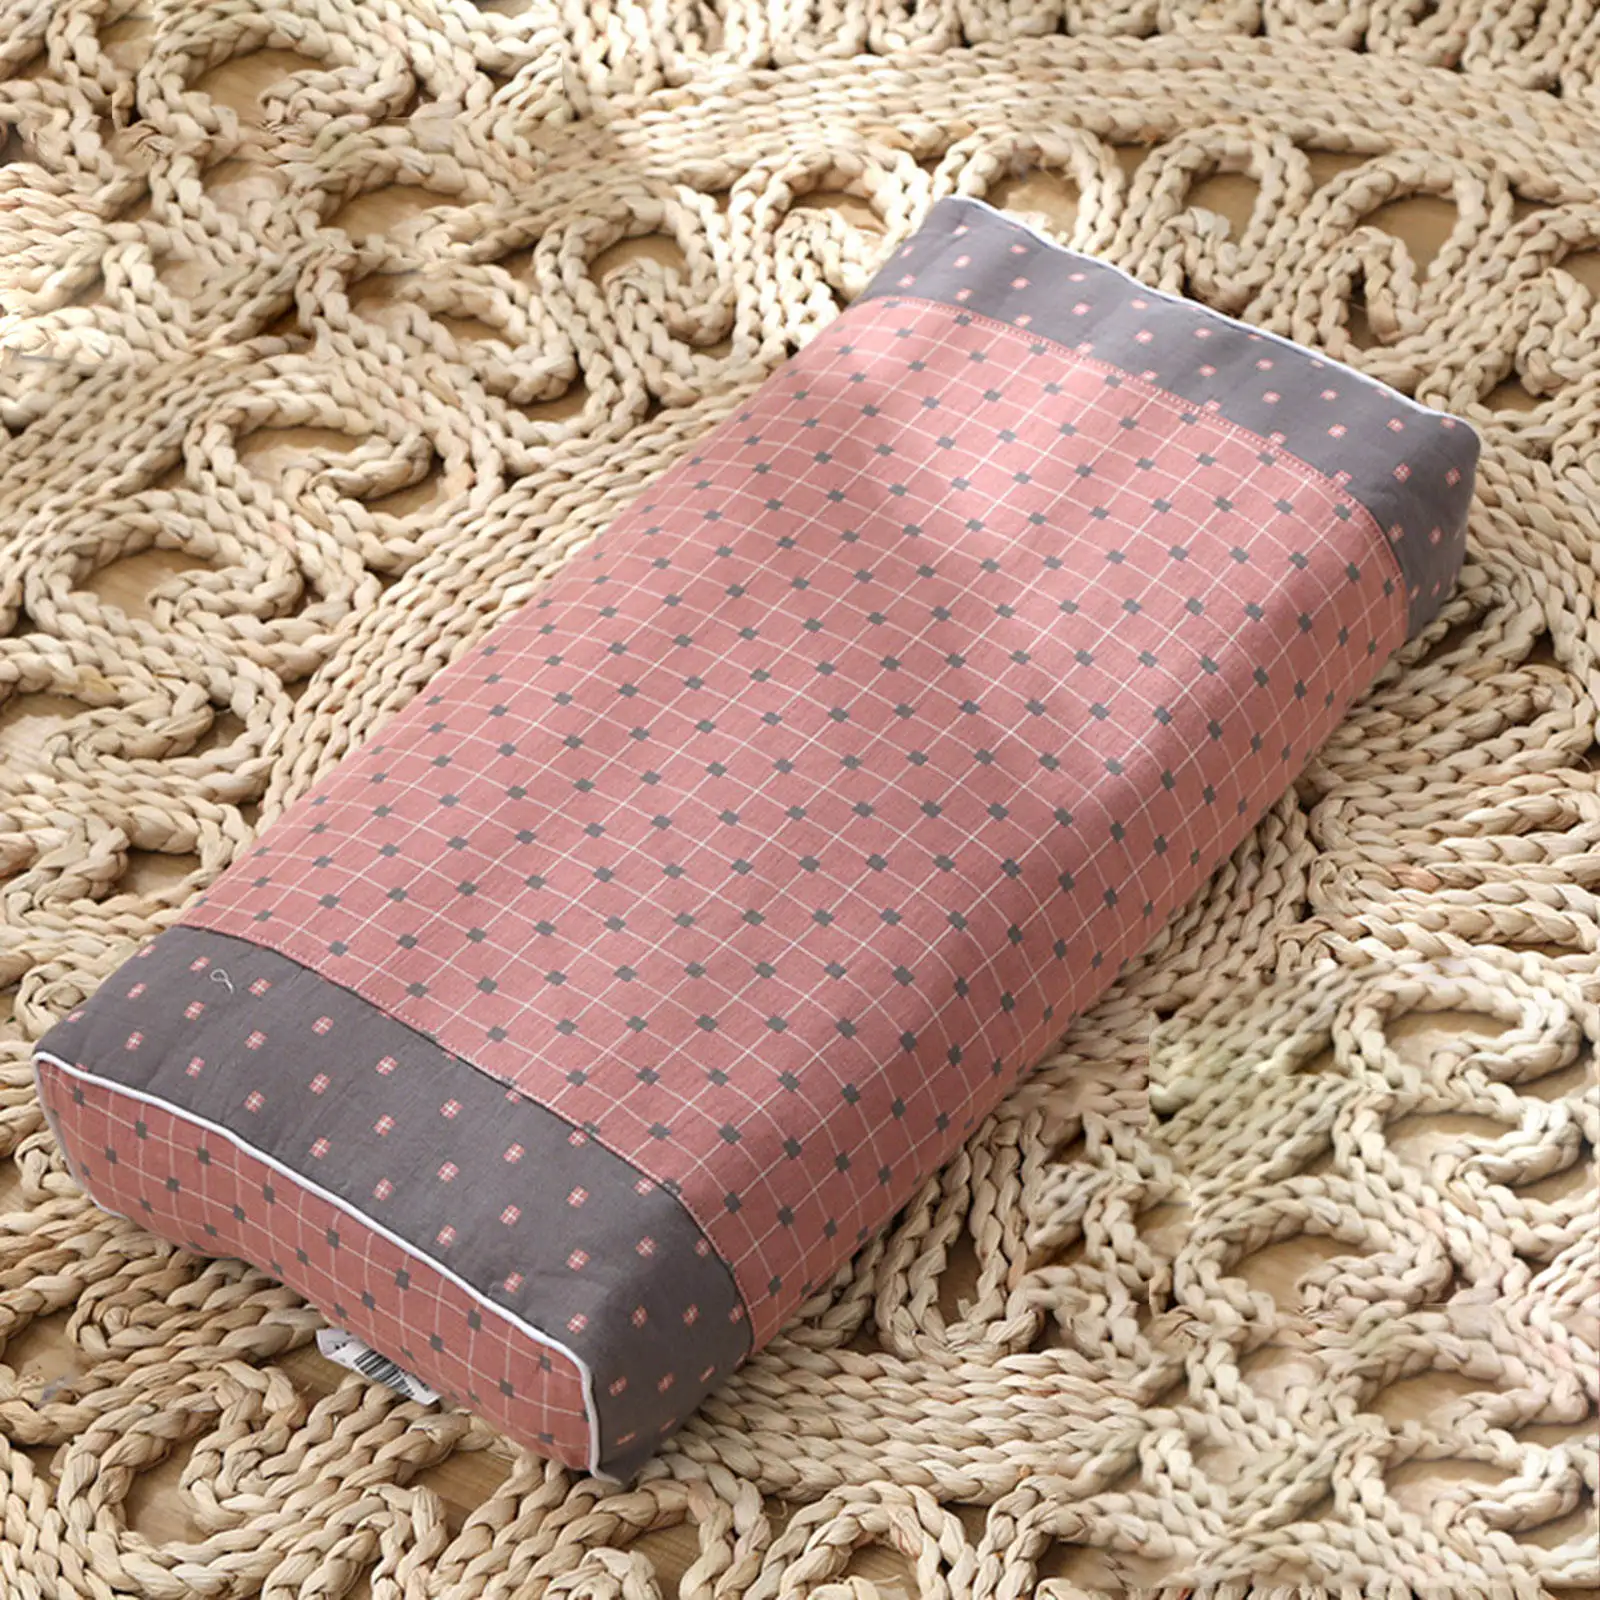 Buckwheat Pillow Uniformly Filled Adjustable Height Good Air Permeability Organic for Back Sleeper Neck Support